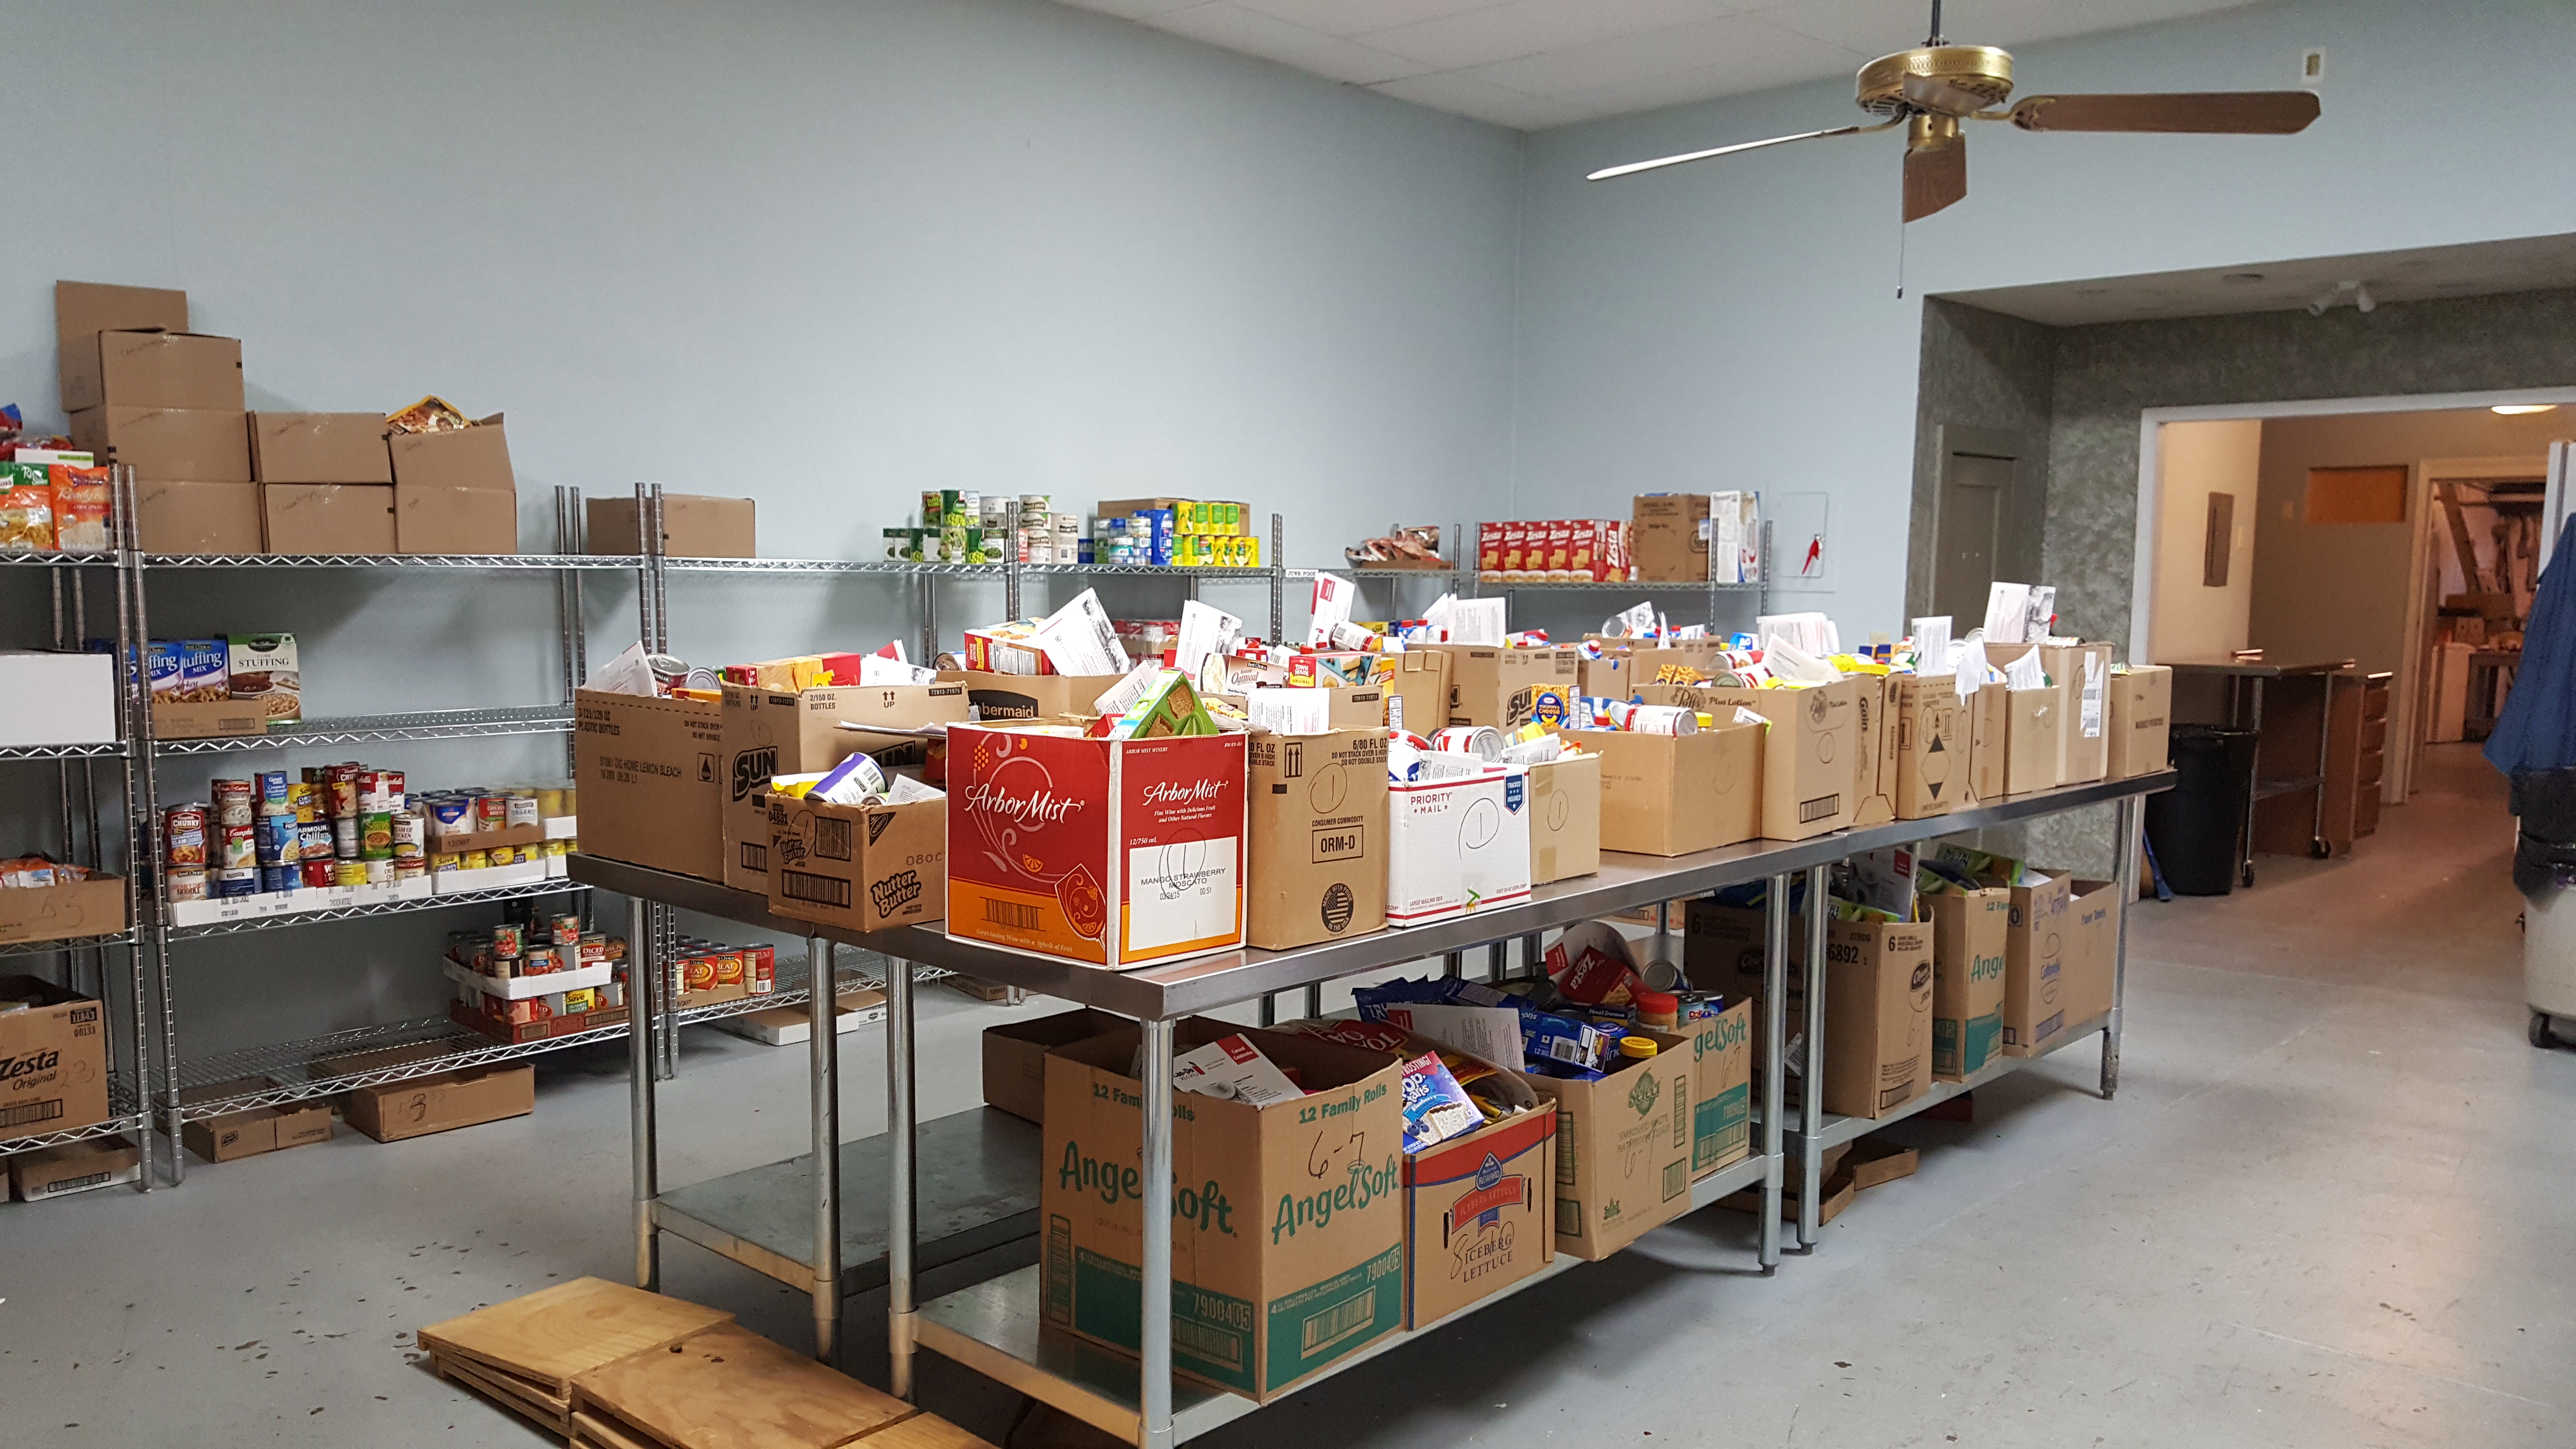 Ash Grove Food Pantry Serves with Compassion and Care